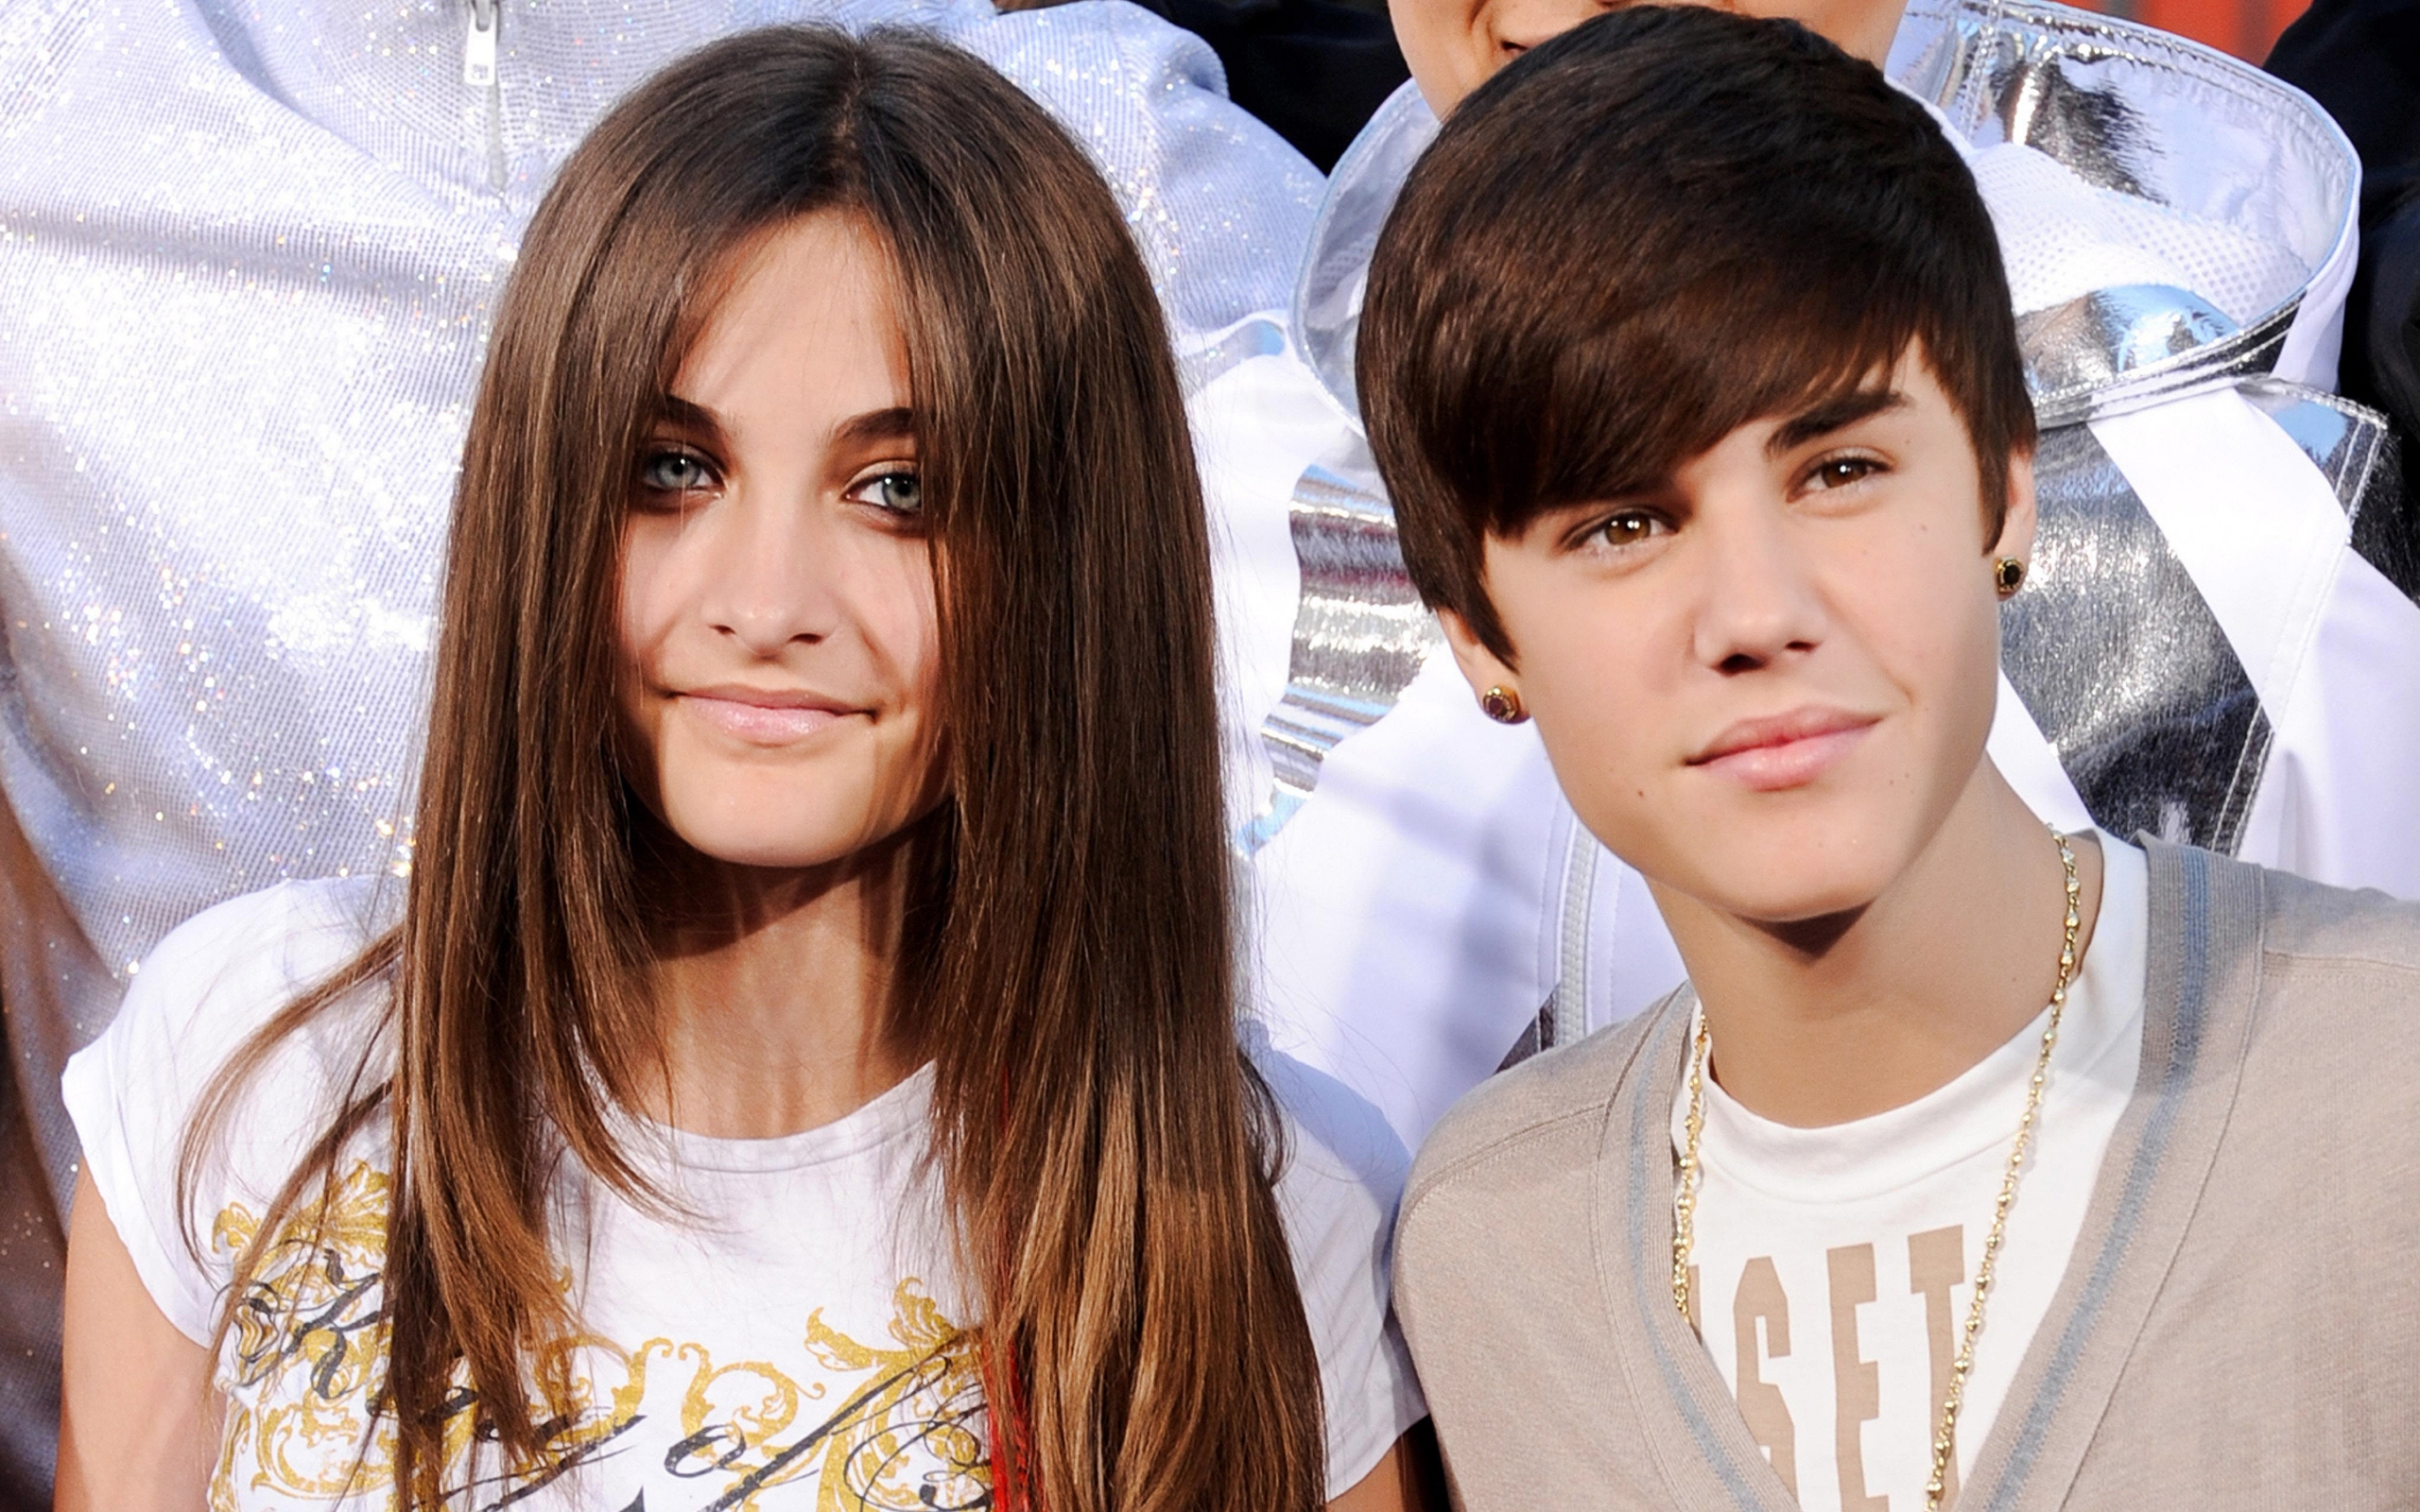 Paris Jackson and Justin Bieber for 2560 x 1600 widescreen resolution